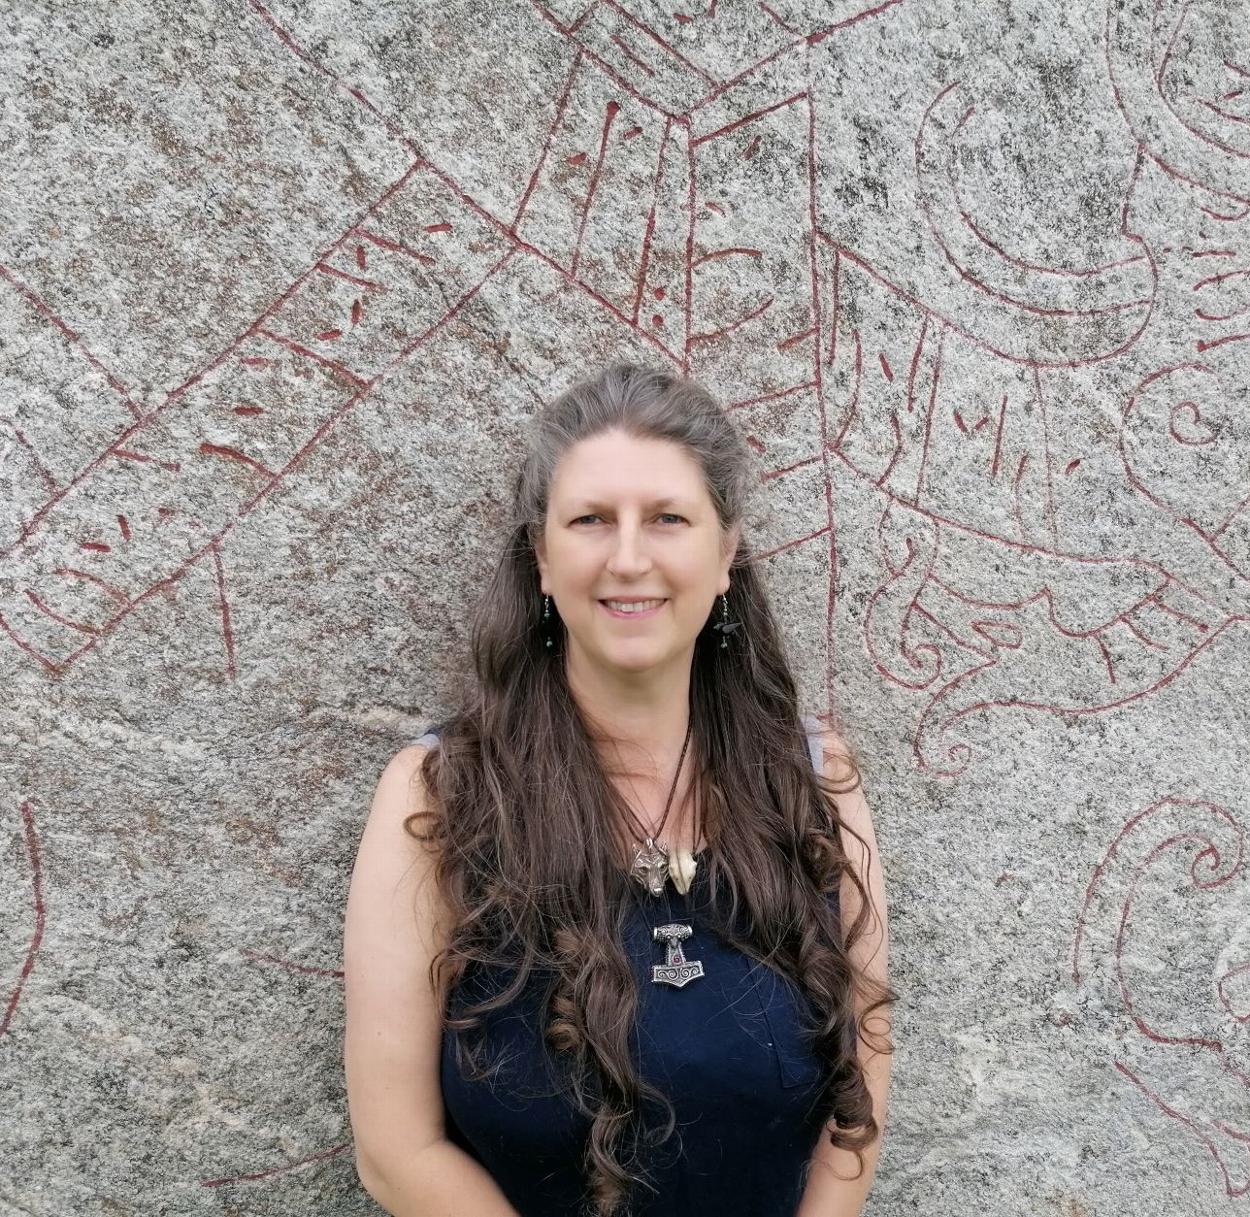 International Teacher, Author, Painter and Forest Witch in Europe and Globally